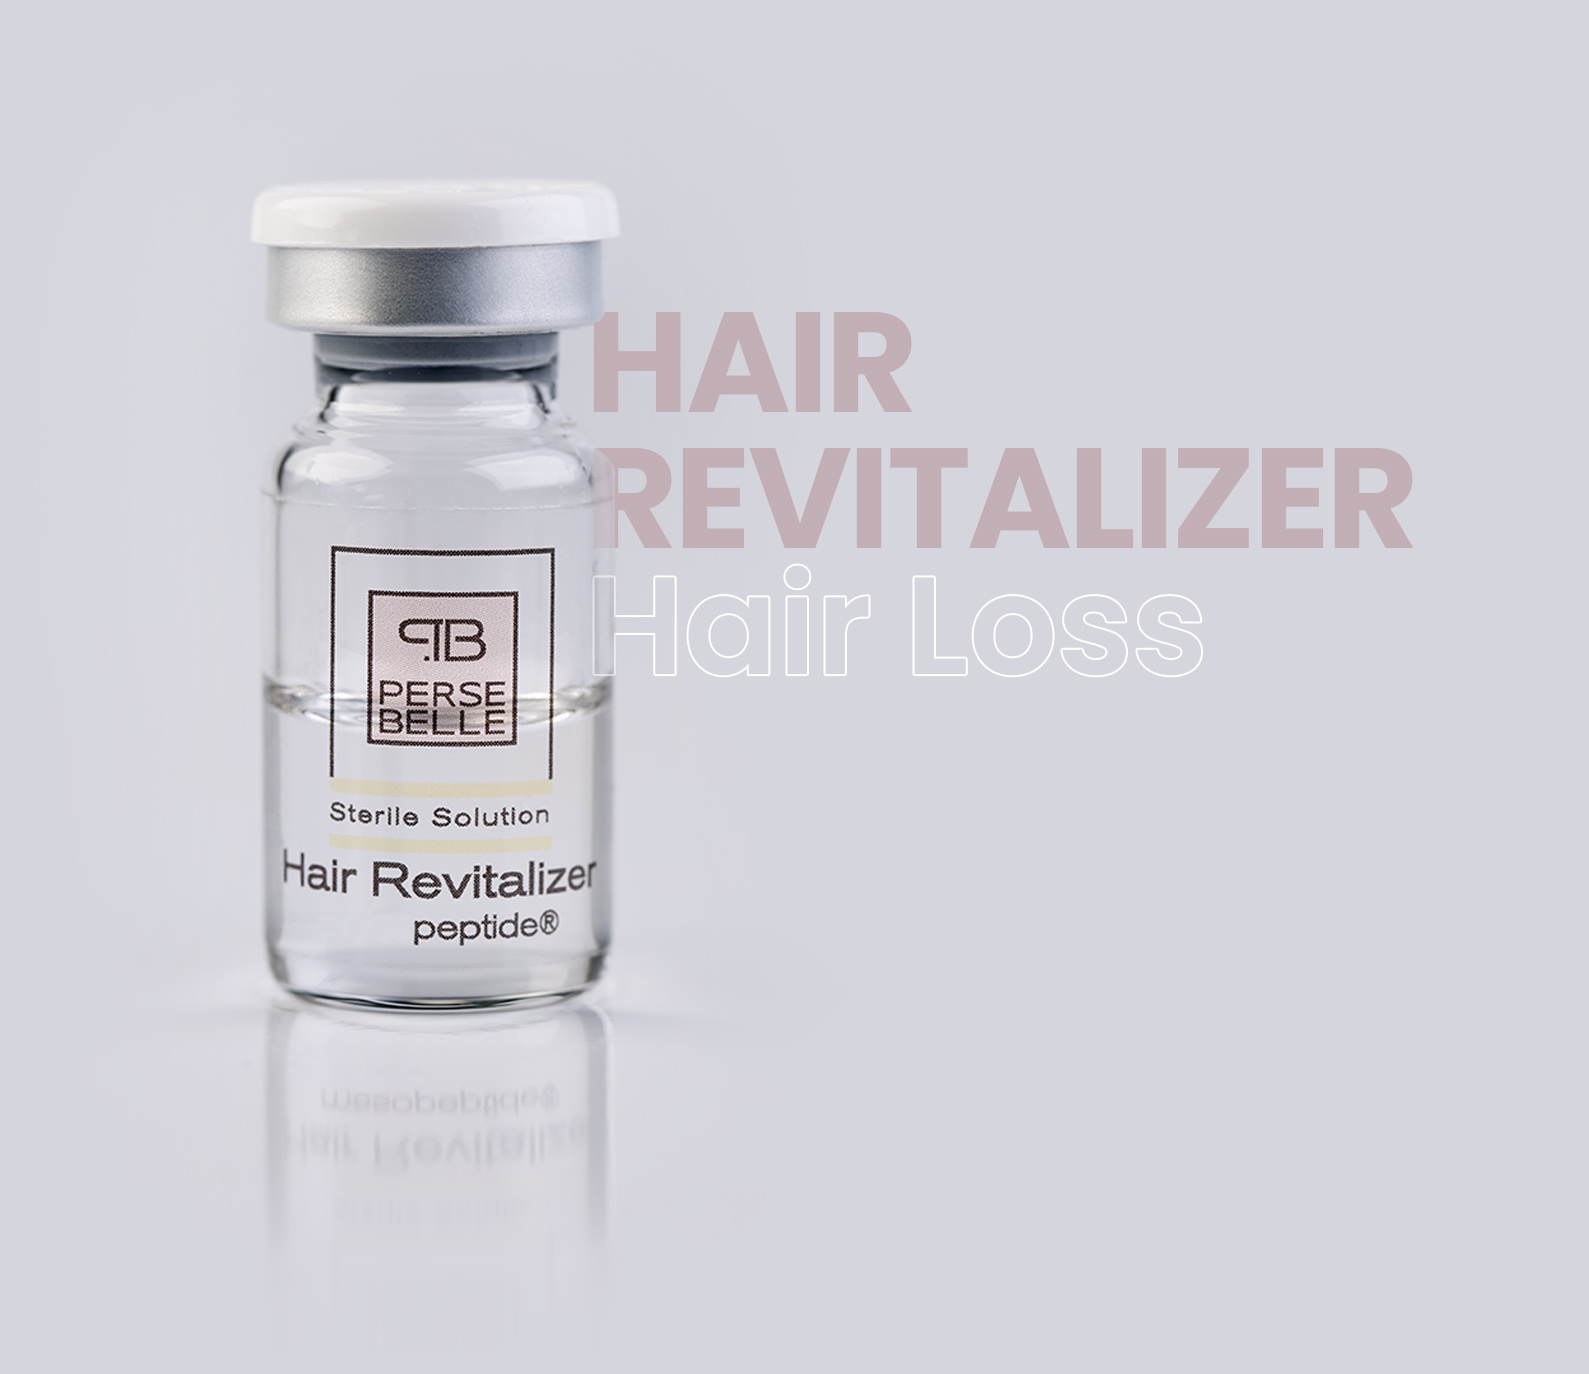 Peptide for hair revitalizer growth - Hair mesotherapy - Persebelle